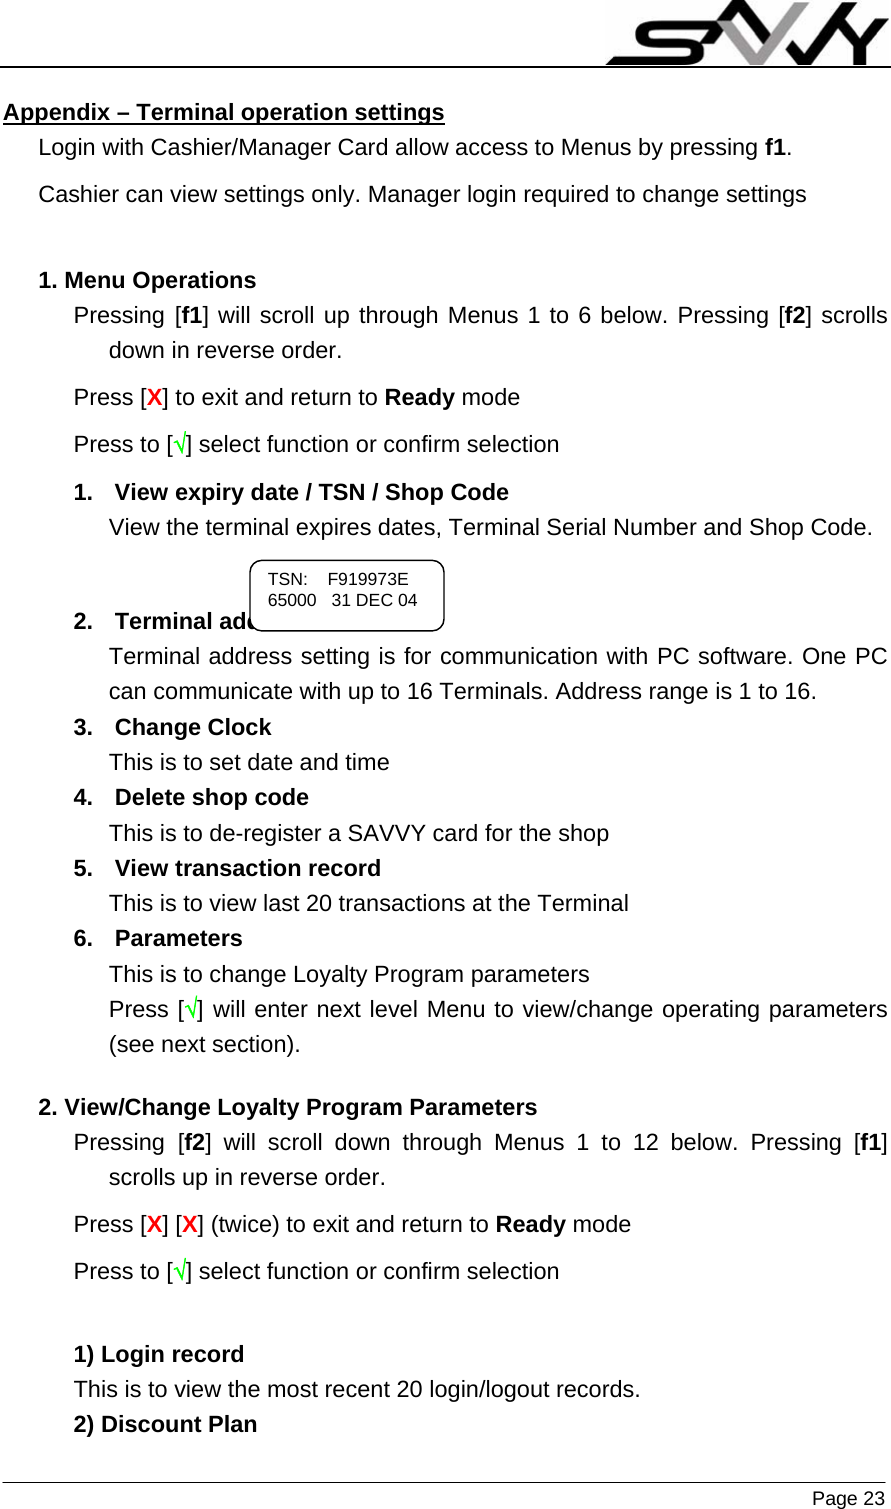                    Page 23   Appendix – Terminal operation settings  Login with Cashier/Manager Card allow access to Menus by pressing f1. Cashier can view settings only. Manager login required to change settings  1. Menu Operations Pressing [f1] will scroll up through Menus 1 to 6 below. Pressing [f2] scrolls down in reverse order. Press [X] to exit and return to Ready mode Press to [√] select function or confirm selection 1.  View expiry date / TSN / Shop Code View the terminal expires dates, Terminal Serial Number and Shop Code.   2. Terminal address Terminal address setting is for communication with PC software. One PC can communicate with up to 16 Terminals. Address range is 1 to 16. 3. Change Clock This is to set date and time 4.  Delete shop code This is to de-register a SAVVY card for the shop 5.  View transaction record This is to view last 20 transactions at the Terminal 6. Parameters This is to change Loyalty Program parameters Press [√] will enter next level Menu to view/change operating parameters (see next section).  2. View/Change Loyalty Program Parameters Pressing [f2] will scroll down through Menus 1 to 12 below. Pressing [f1] scrolls up in reverse order. Press [X] [X] (twice) to exit and return to Ready mode Press to [√] select function or confirm selection  1) Login record This is to view the most recent 20 login/logout records. 2) Discount Plan TSN:    F919973E 65000   31 DEC 04 